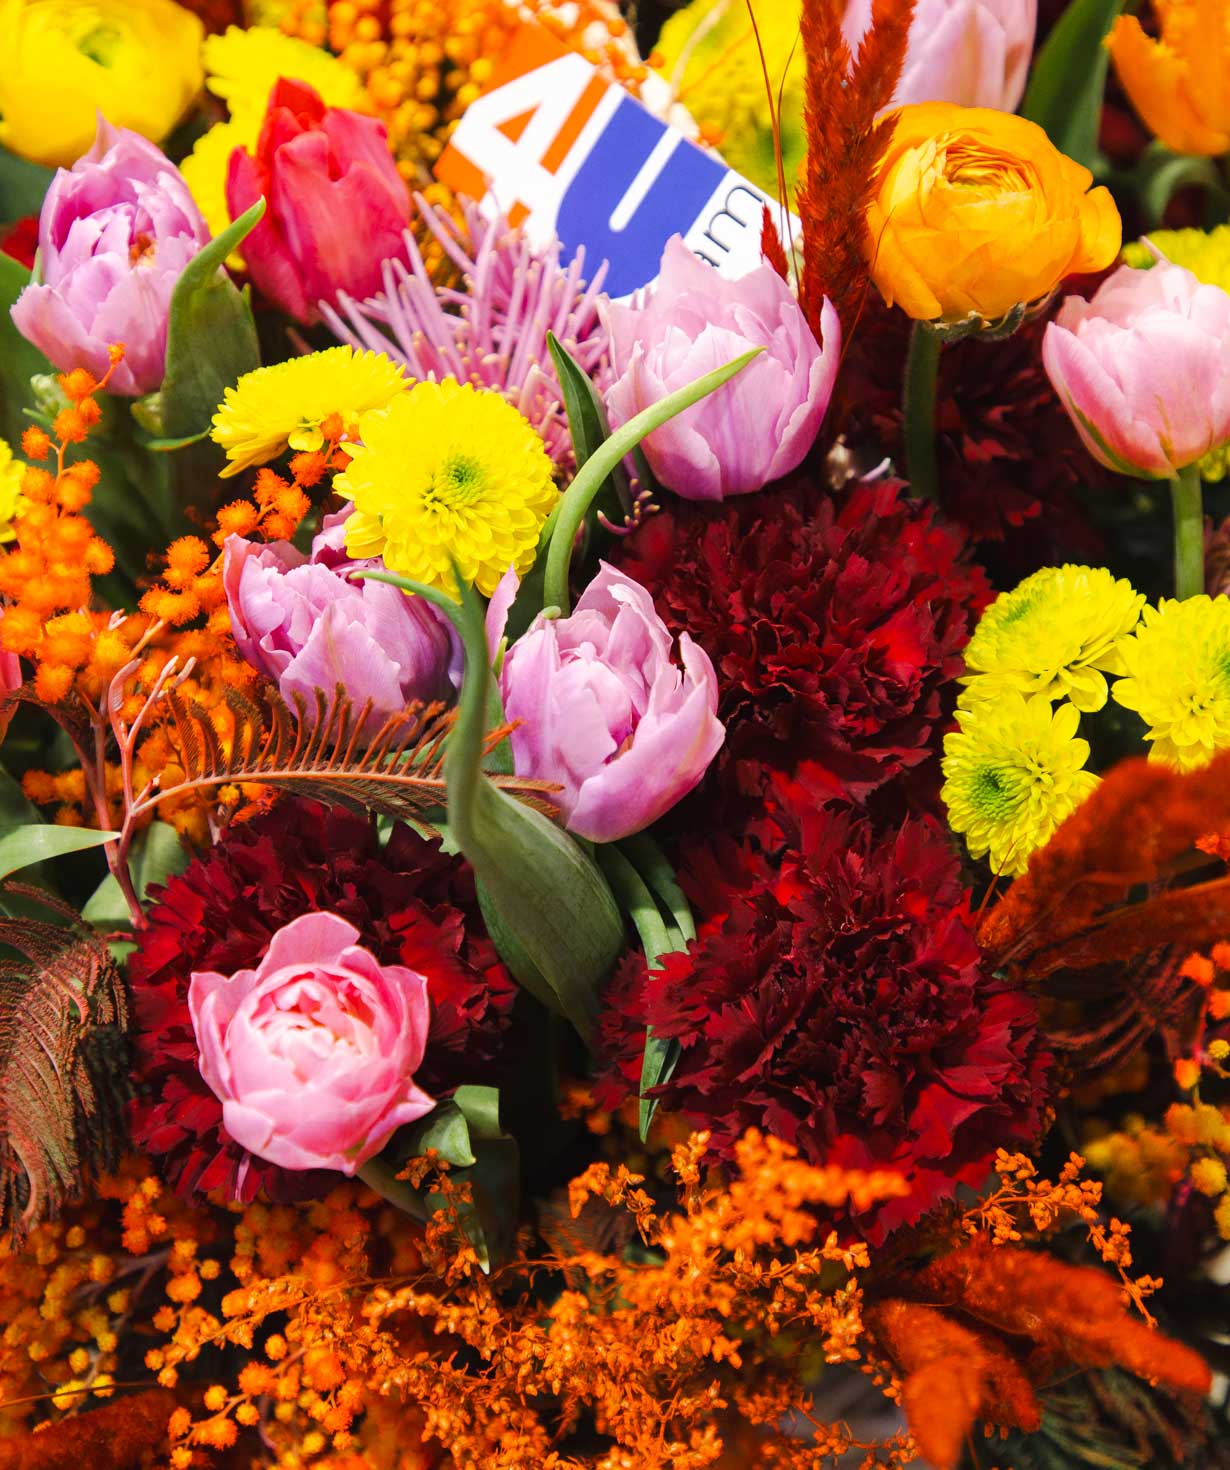 Composition «Rügen» with tulips and chrysanthemums